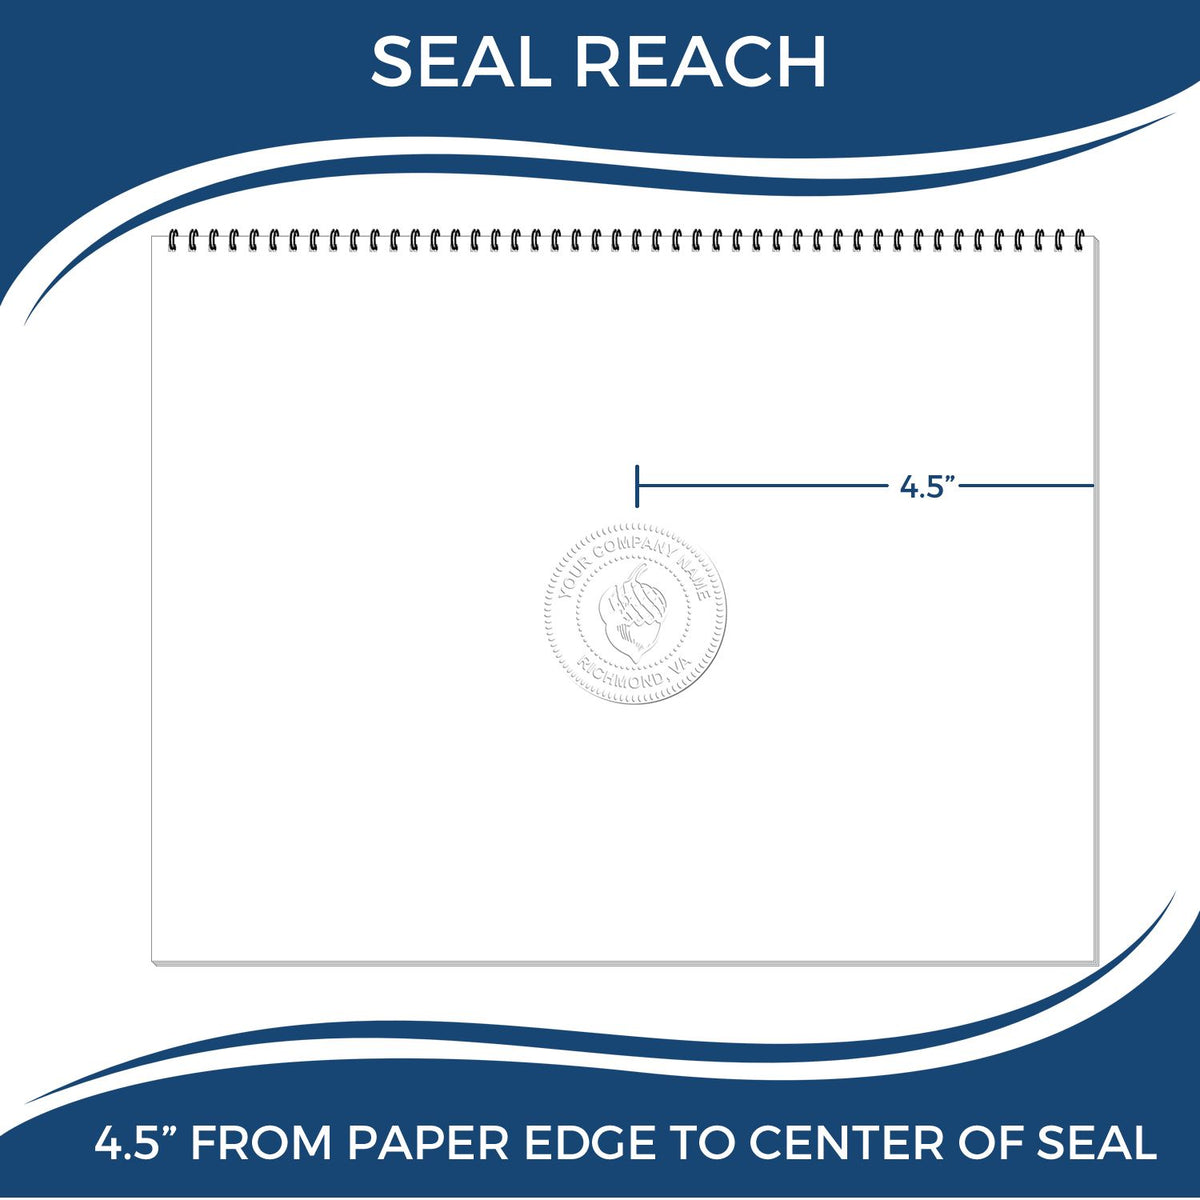 An infographic showing the seal reach which is represented by a ruler and a miniature seal image of the State of New Mexico Extended Long Reach Geologist Seal